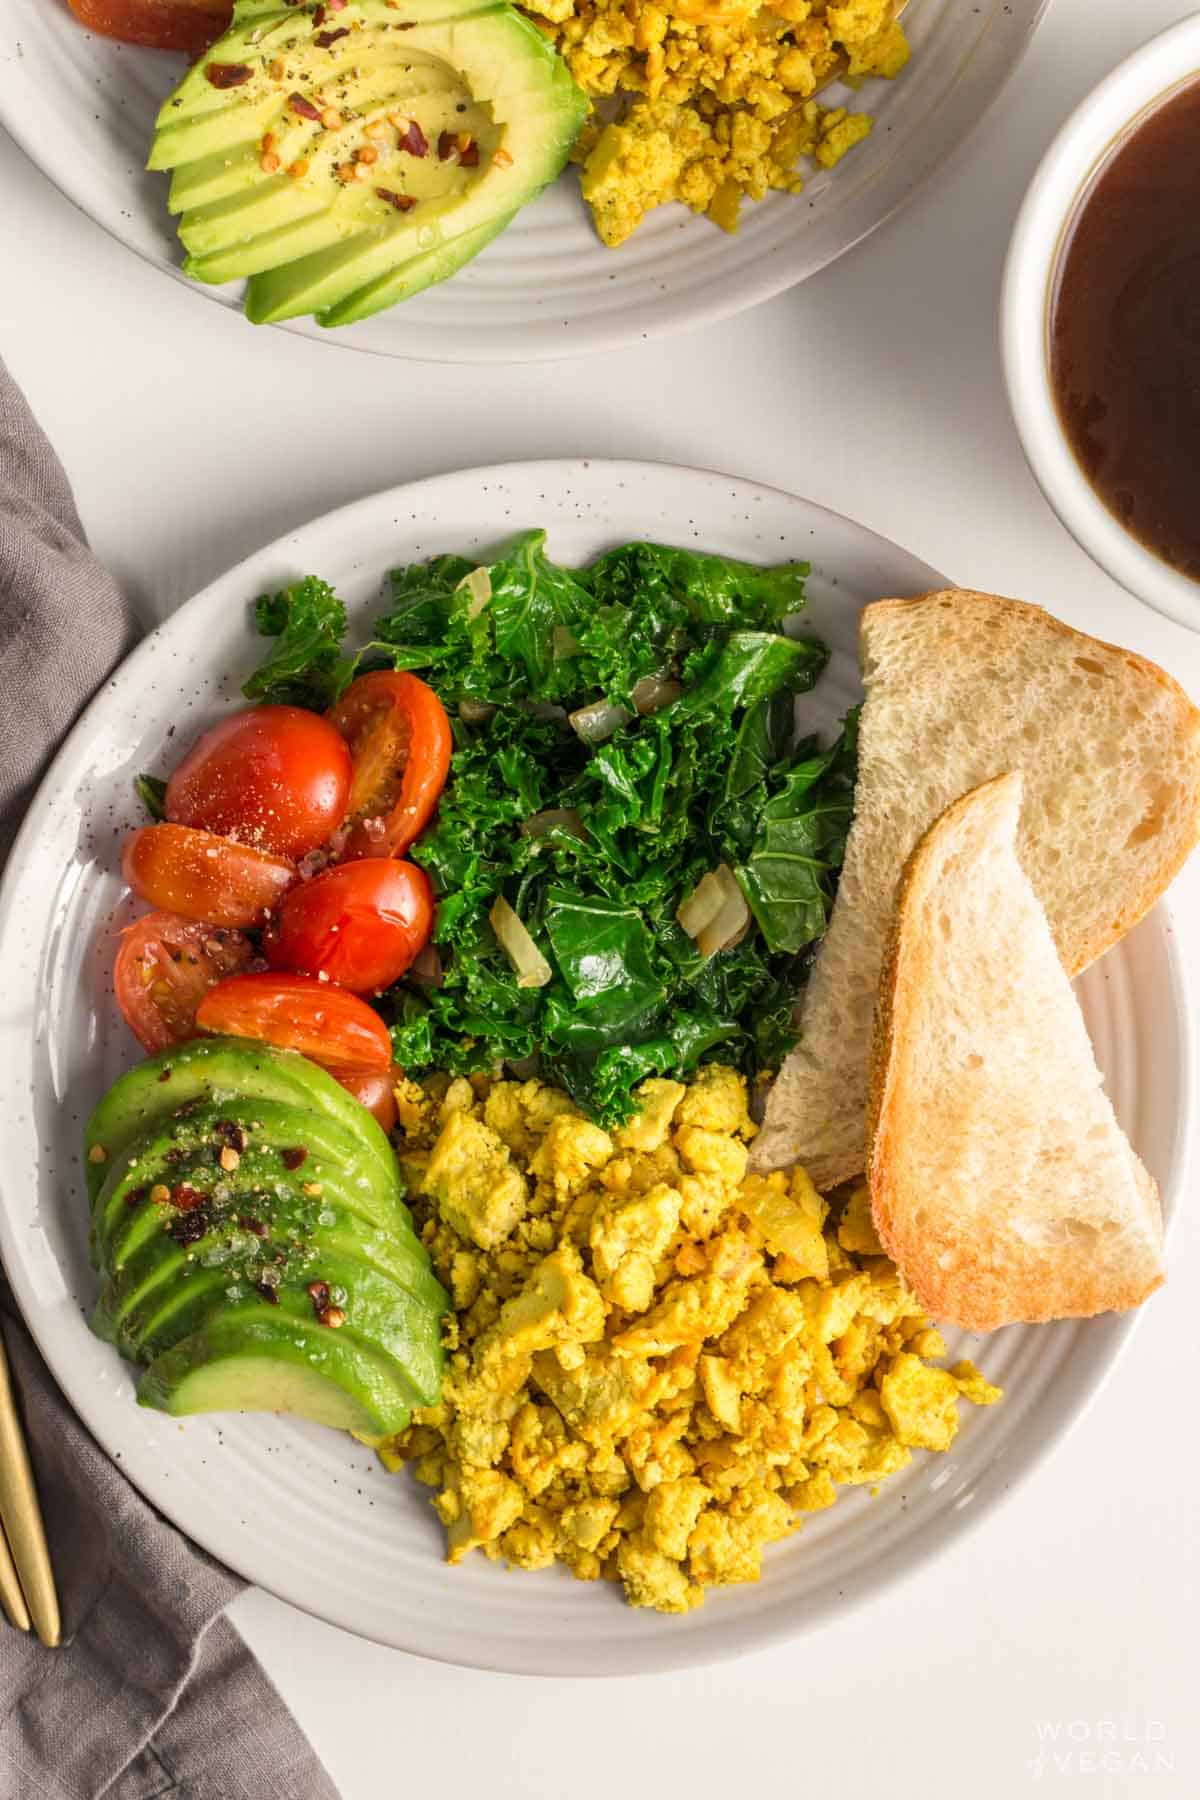 Tofu scramble served up on a vegan breakfast plate with avocado tomatoes greens and toast.